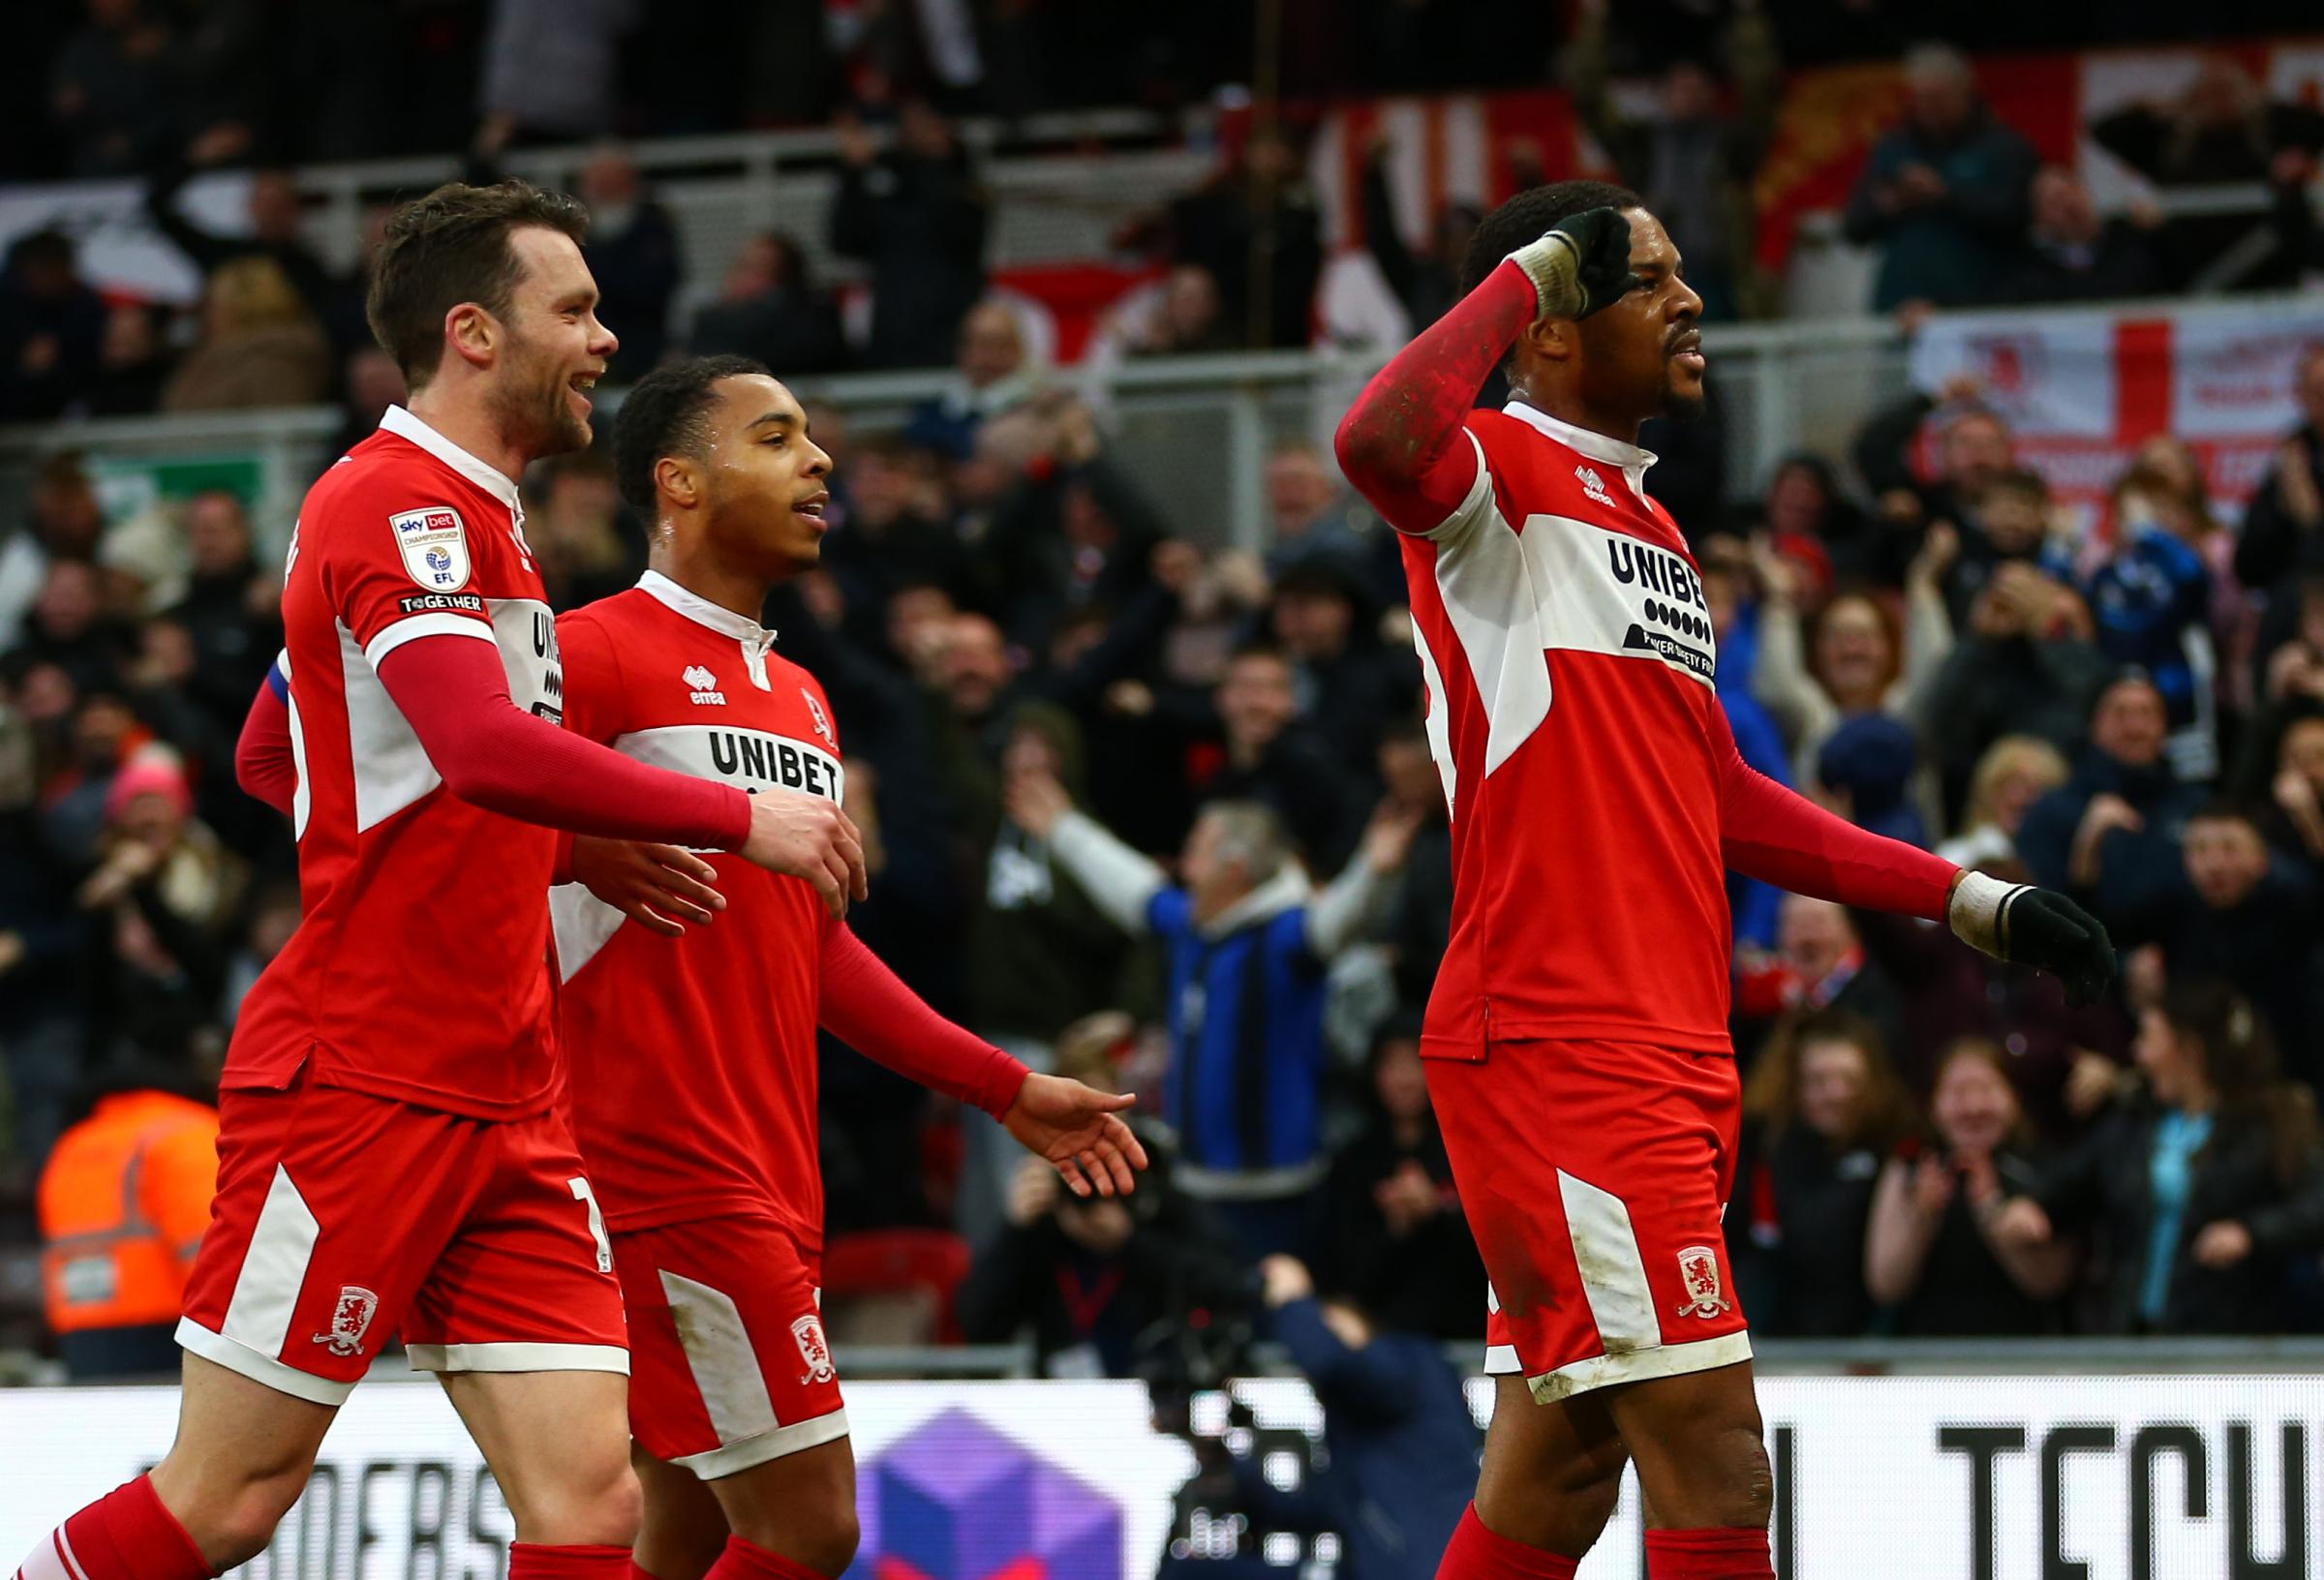 Match Ratings: Middlesbrough 2 Watford 0 - Akpom is star man